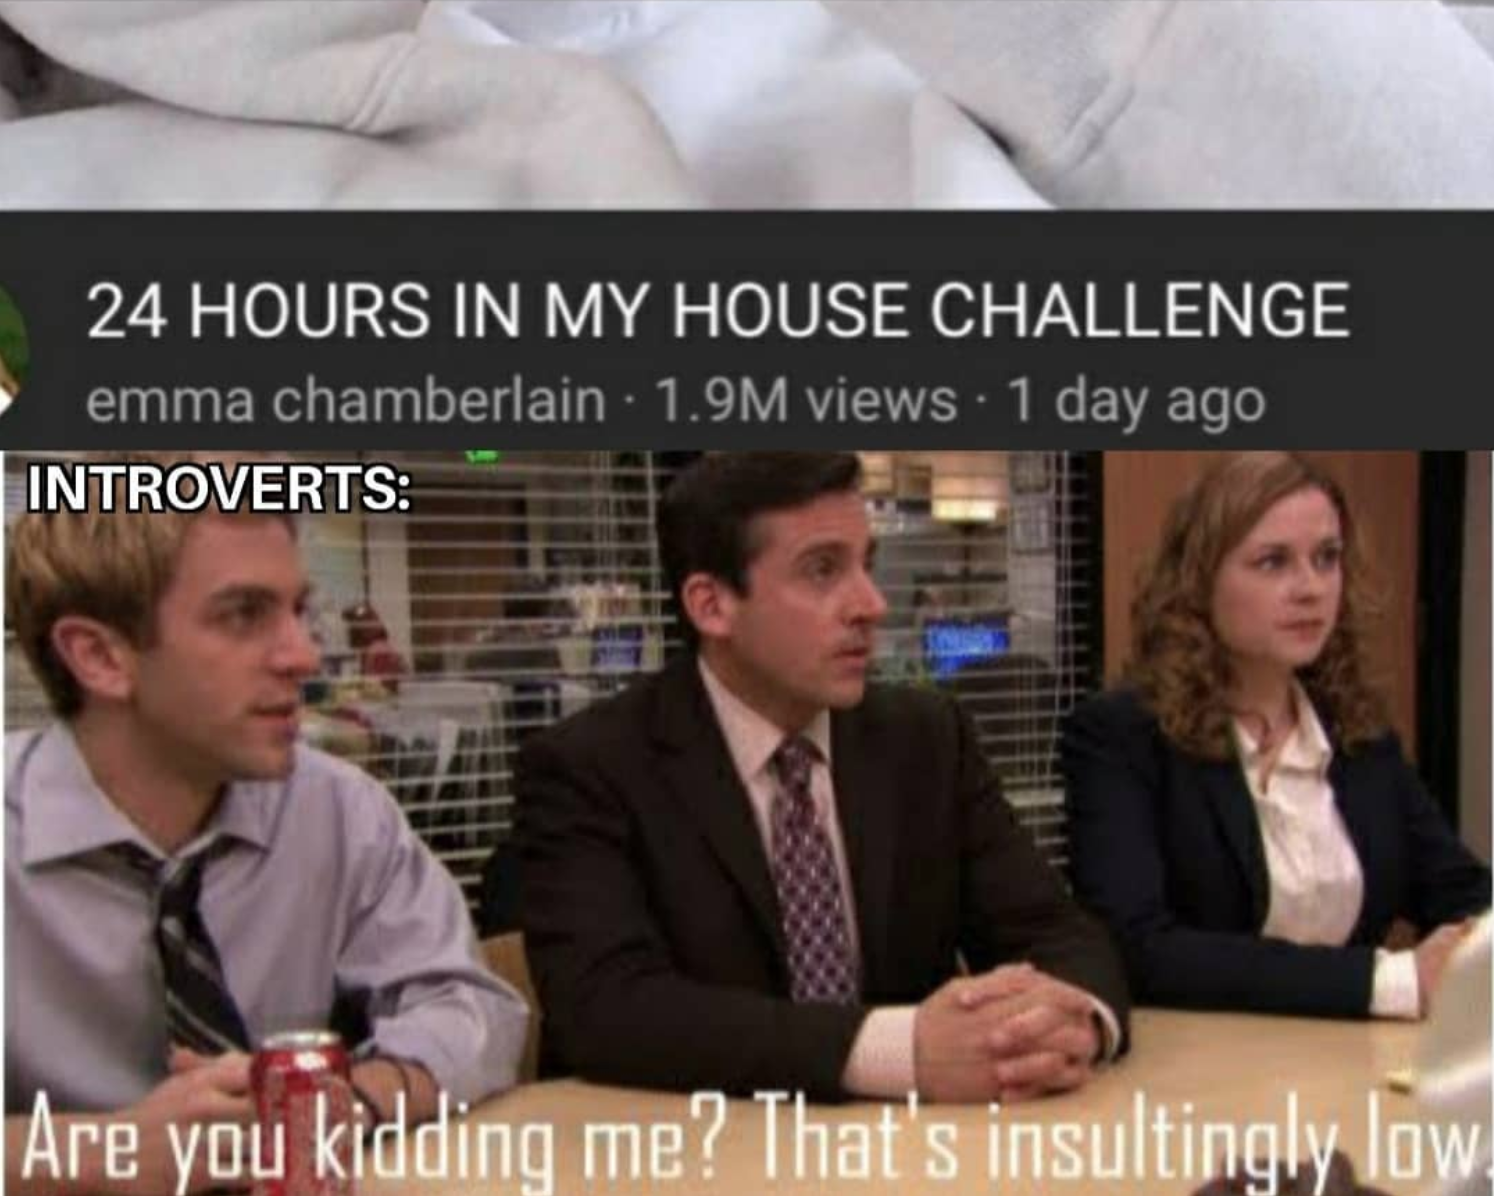 funny gaming memes - Internet meme - 24 Hours In My House Challenge emma chamberlain 1.9M views 1 day ago Introverts Are you kidding me? That's insultingly low